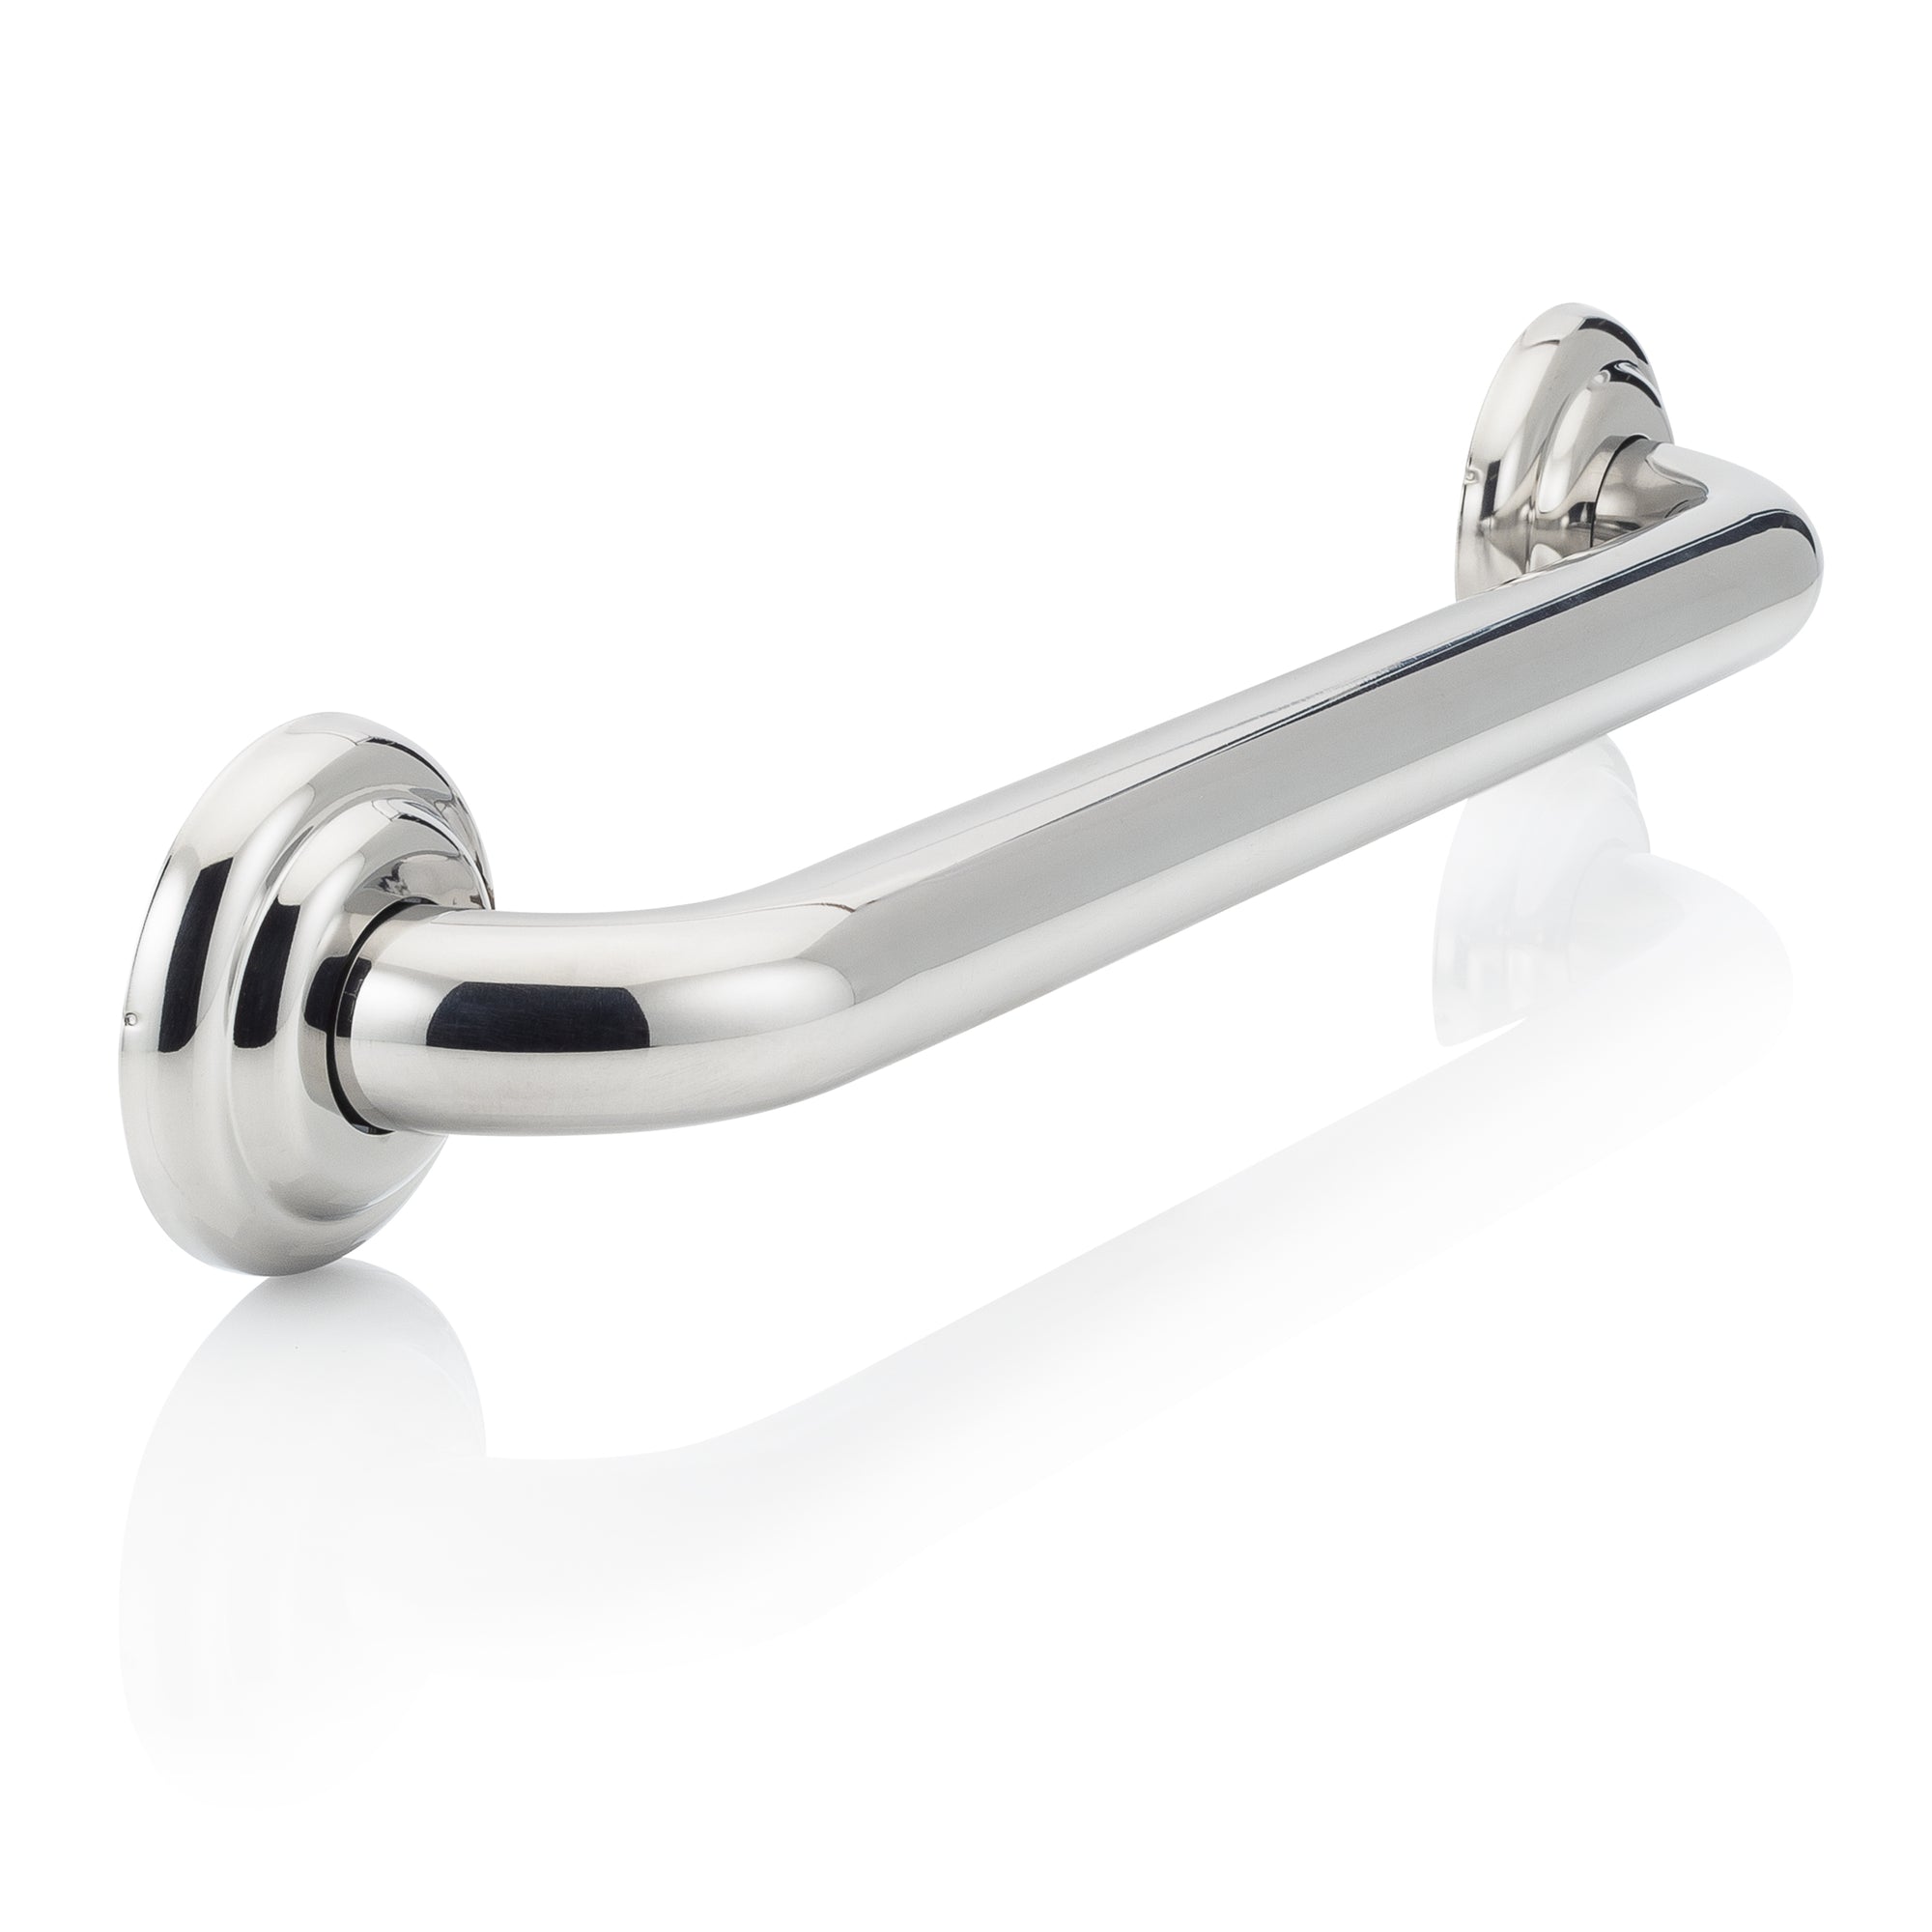 Grab bars are available in many styles and finishes!